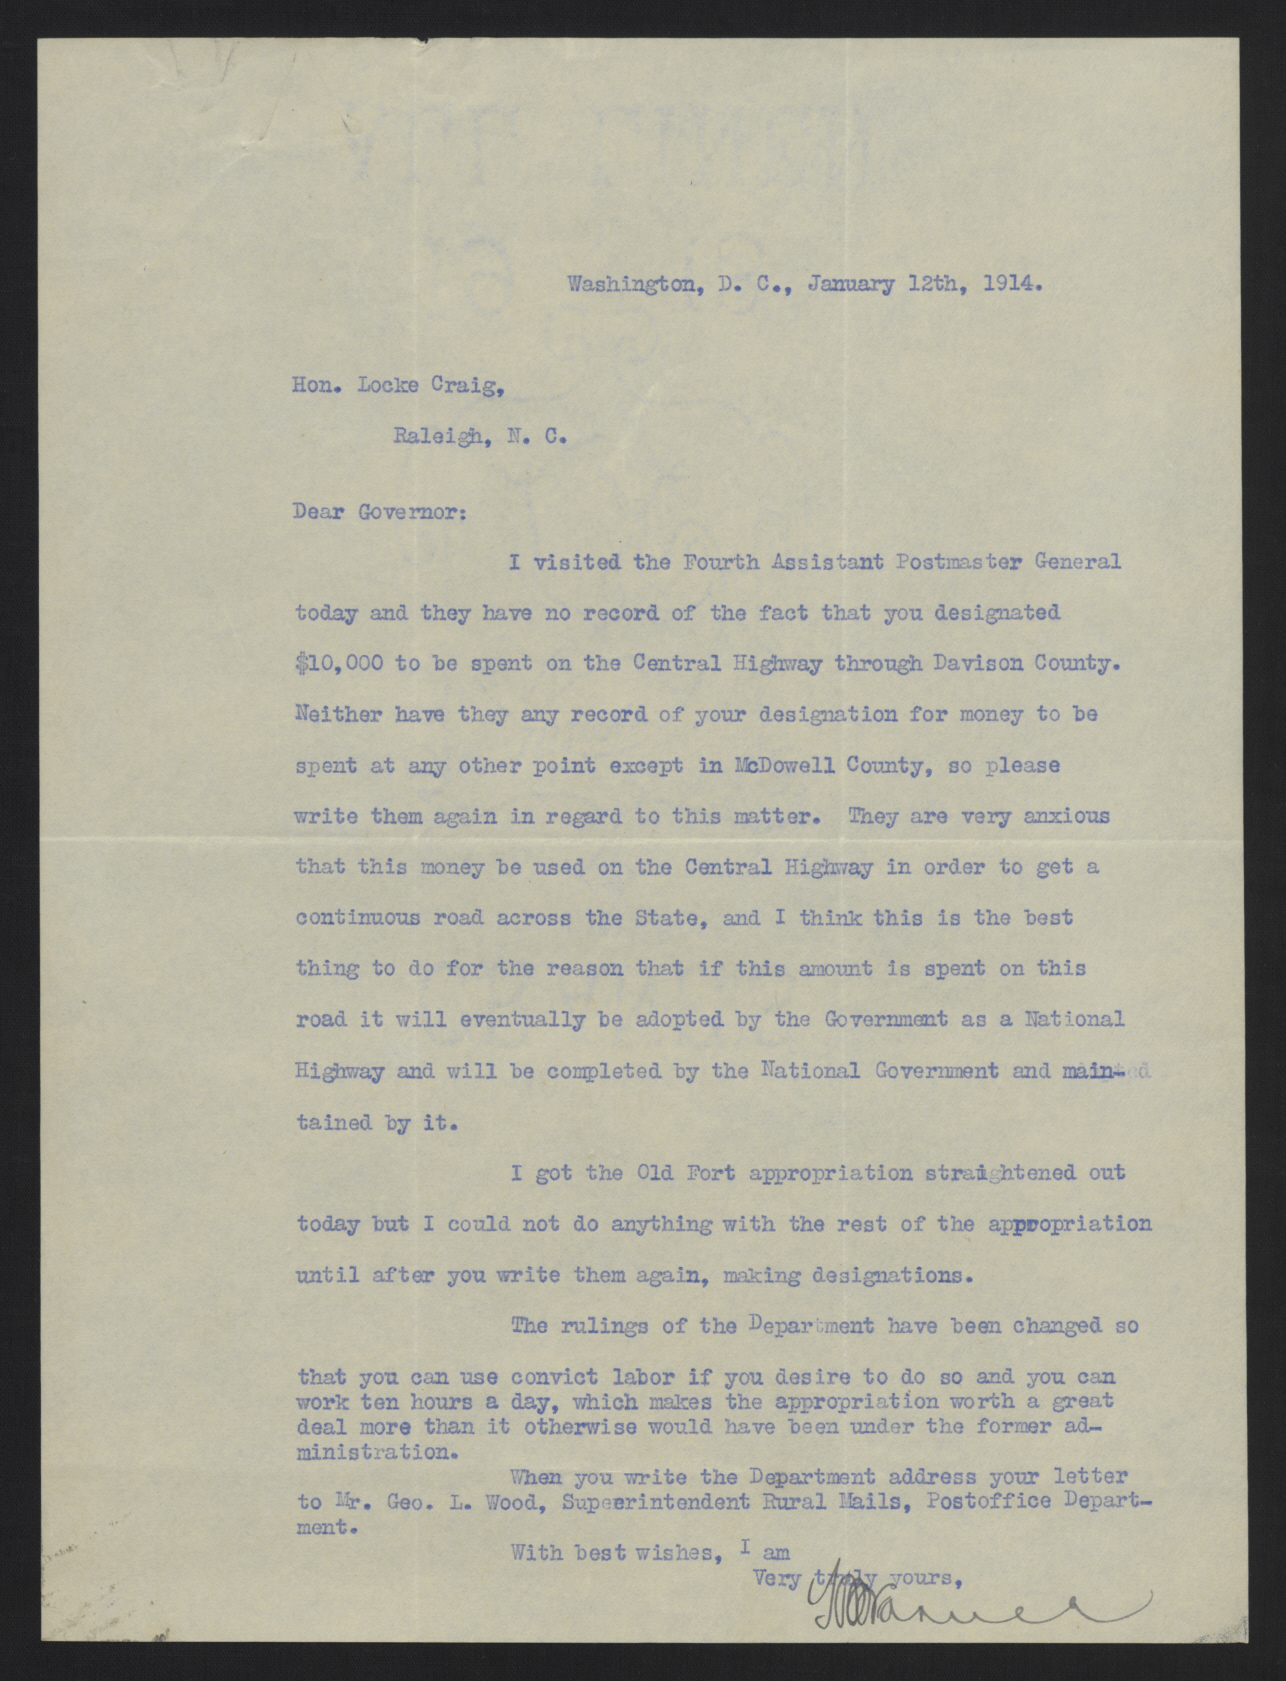 Letter from Varner to Craig, January 12, 1914